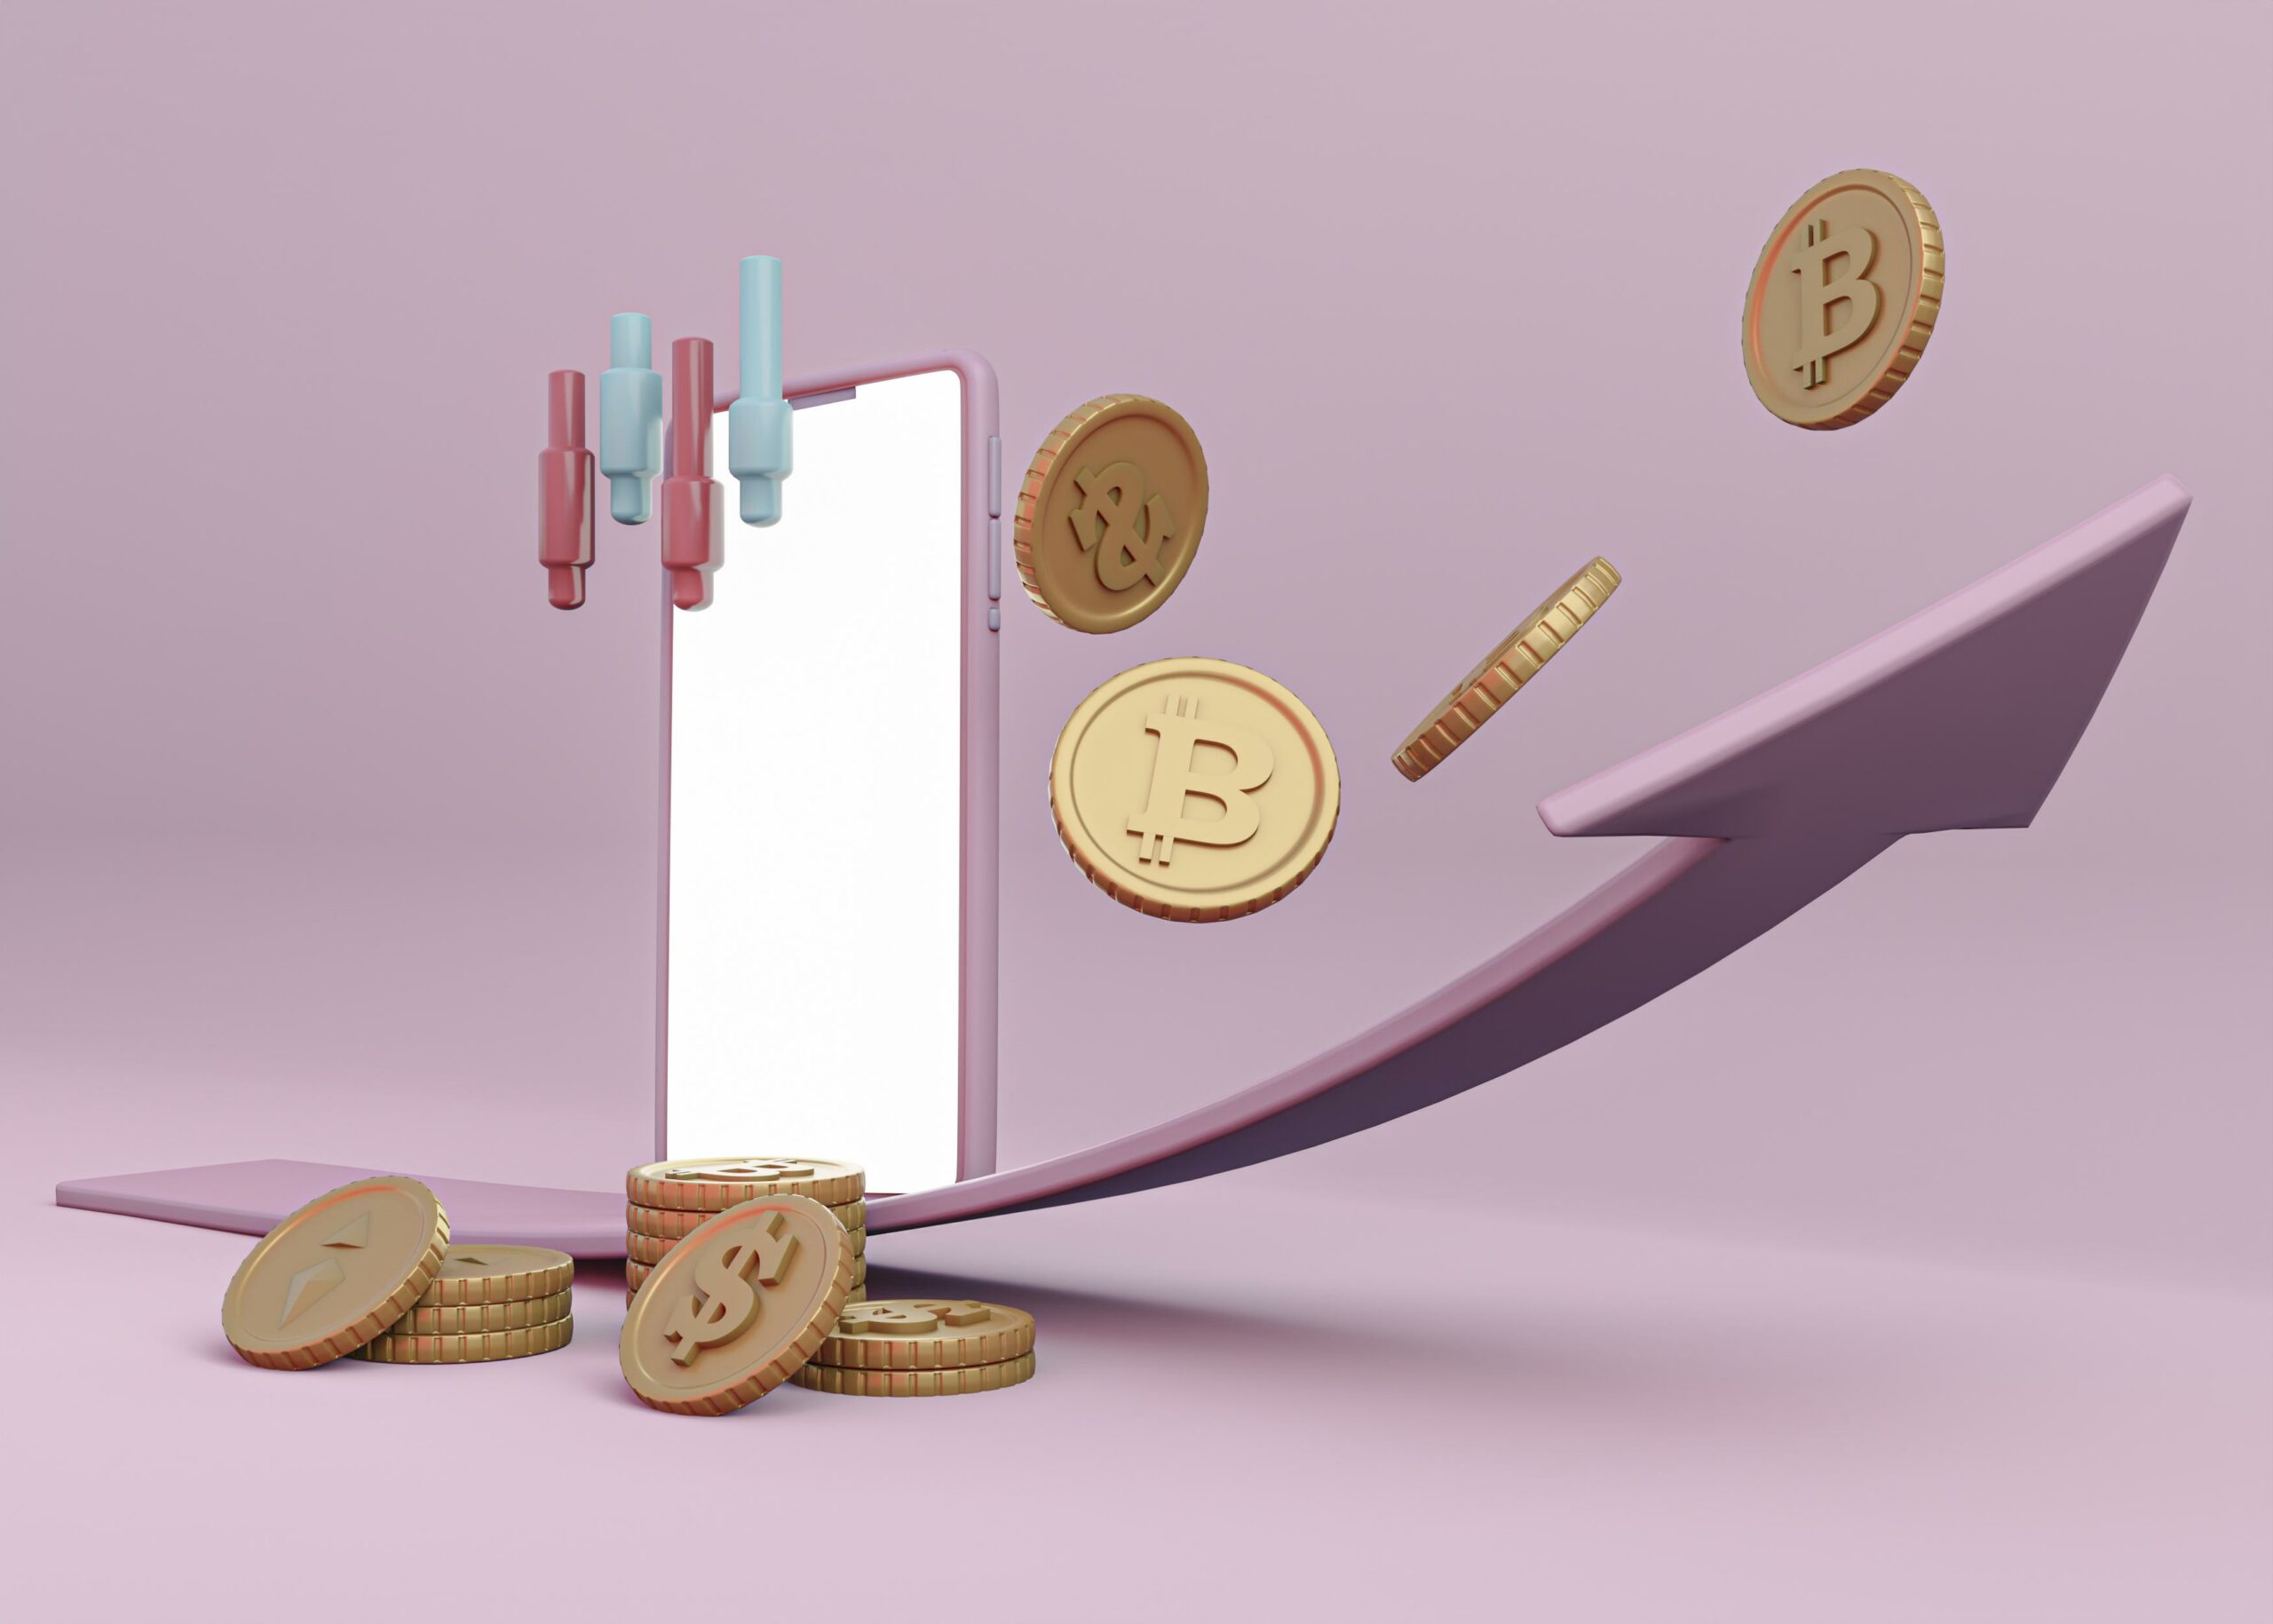 3d illustration on the theme of income growth through the use of blockchain